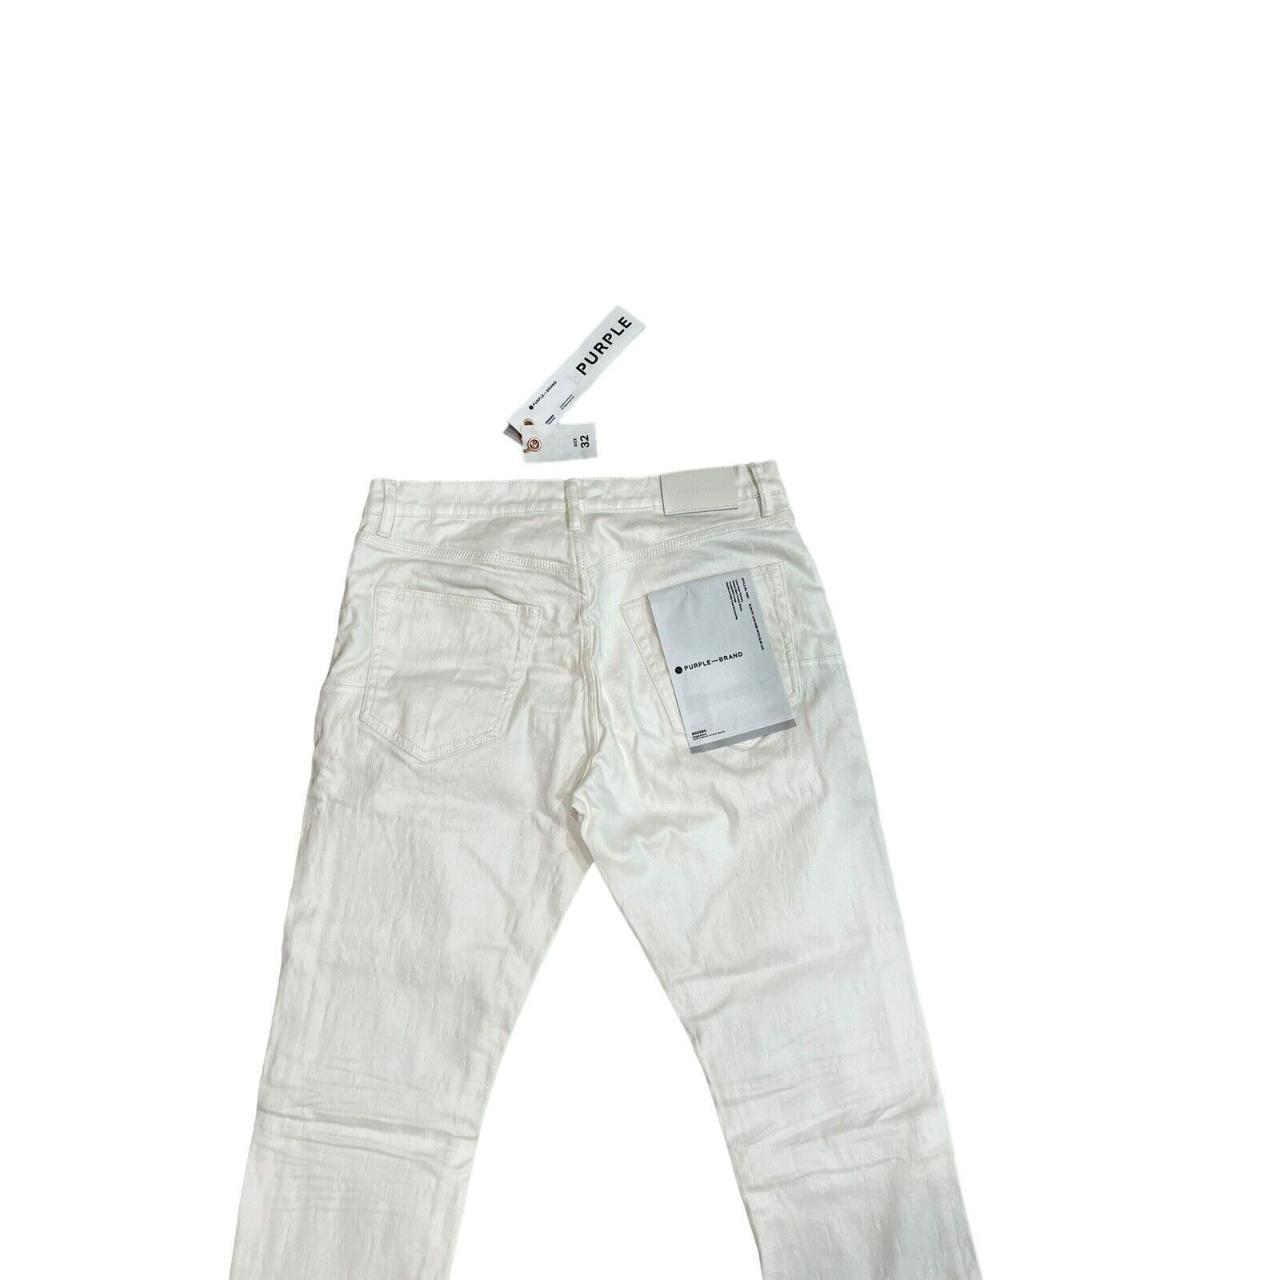 Purple Brand Label, Jeans, Limited Edition White Purple Brand Label Jeans